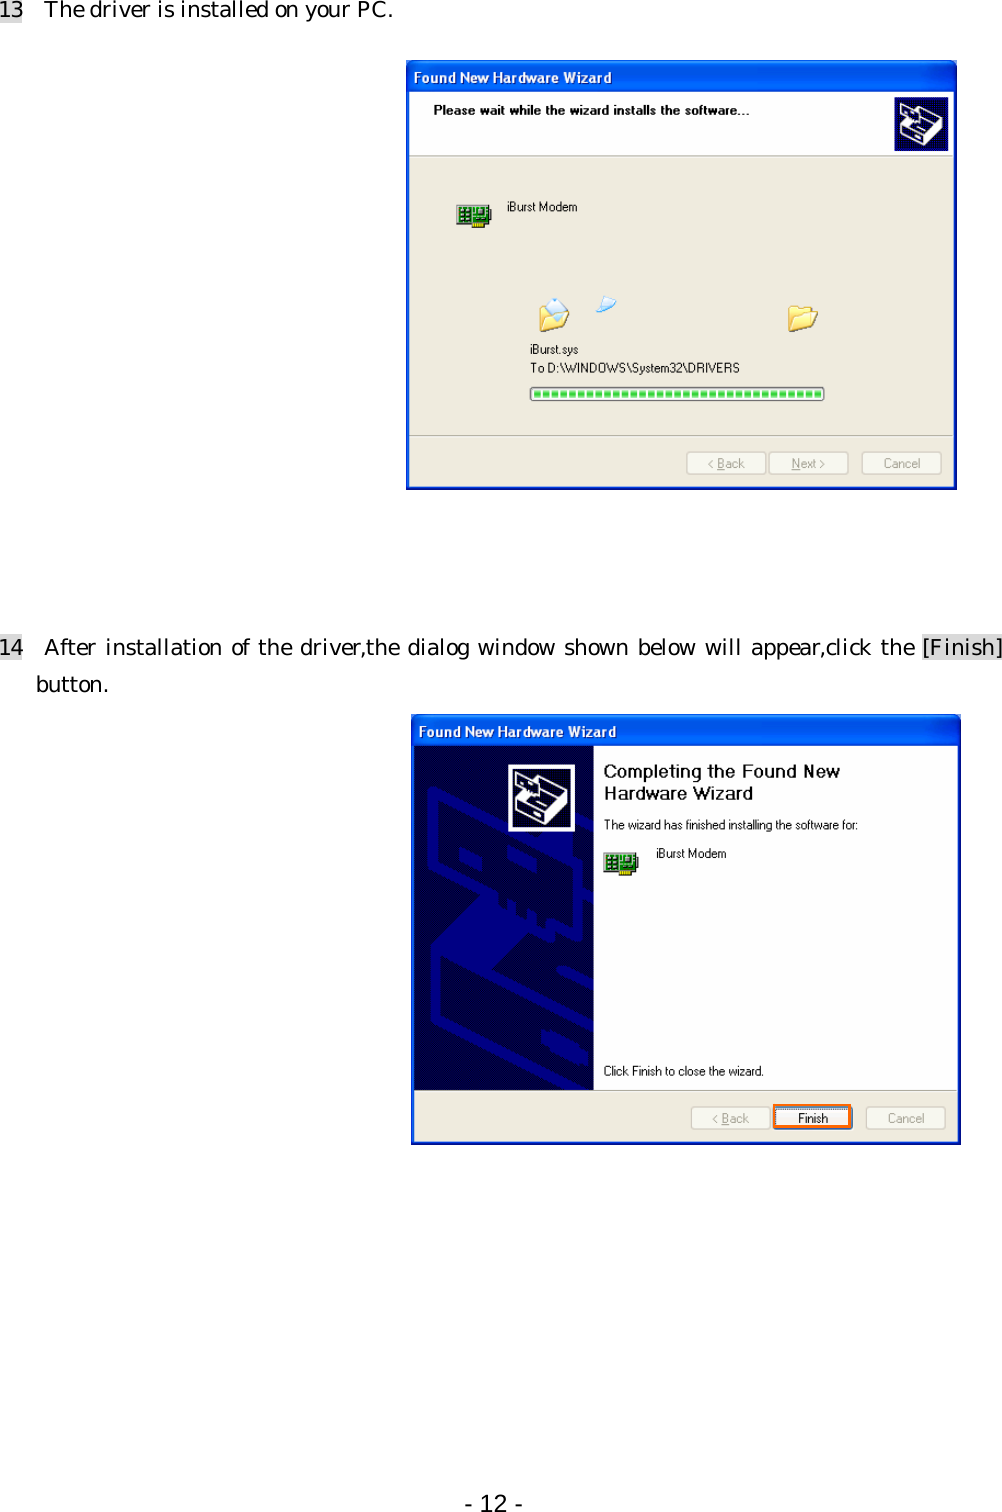 13    The driver is installed on your PC.                 14  After installation of the driver,the dialog window shown below will appear,click the [Finish] button.                     - 12 -  